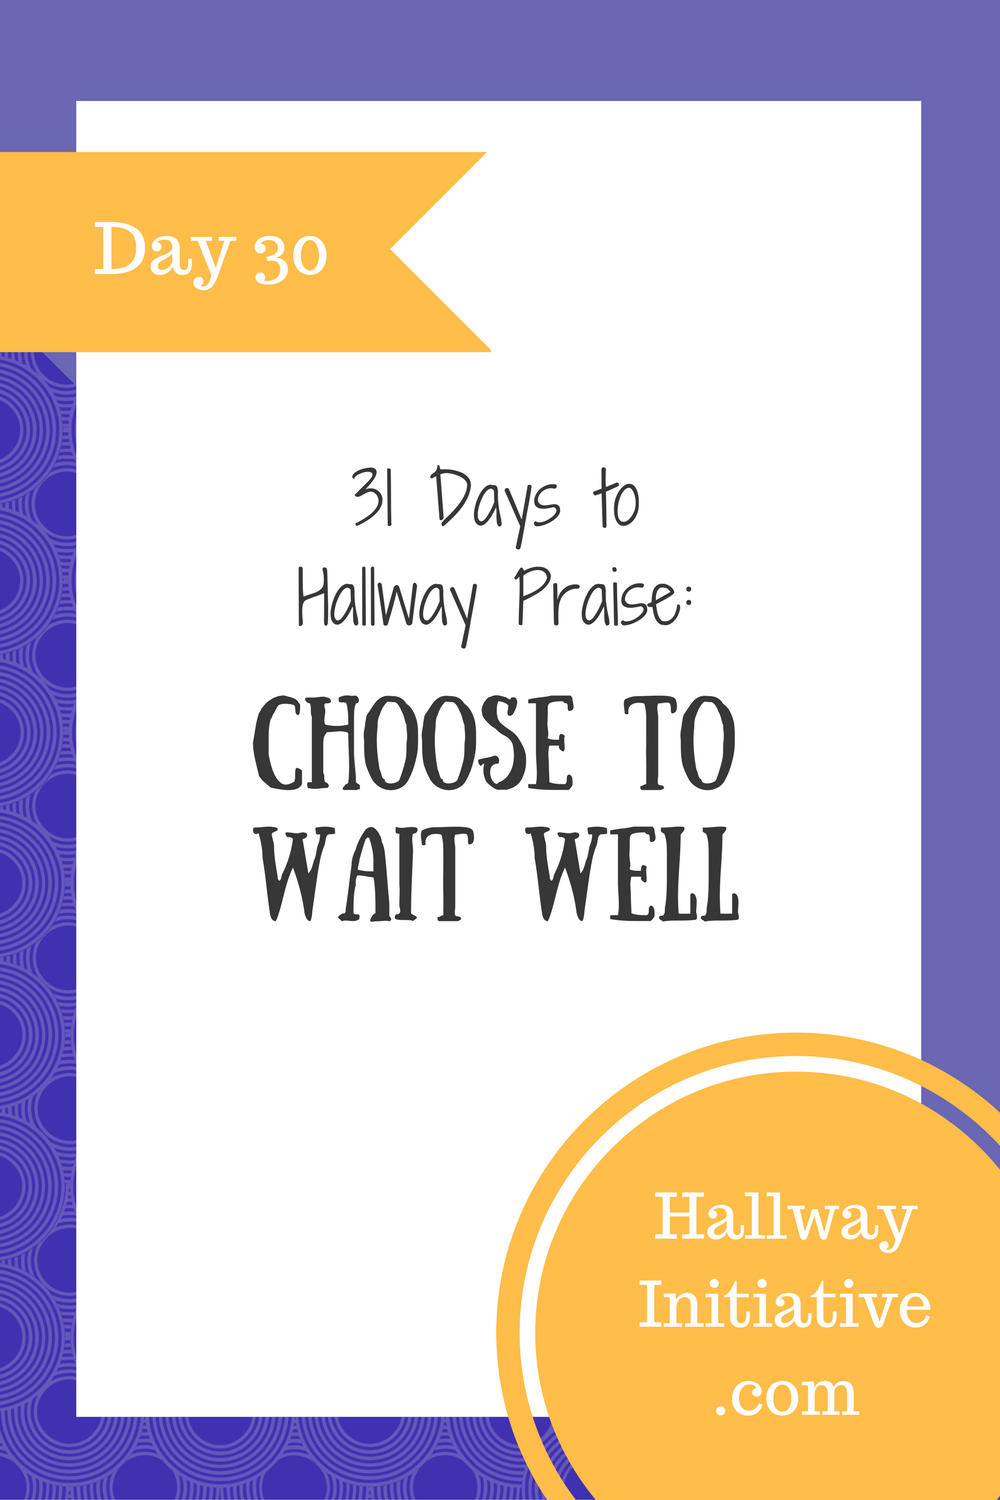 Day 30: choose to wait well